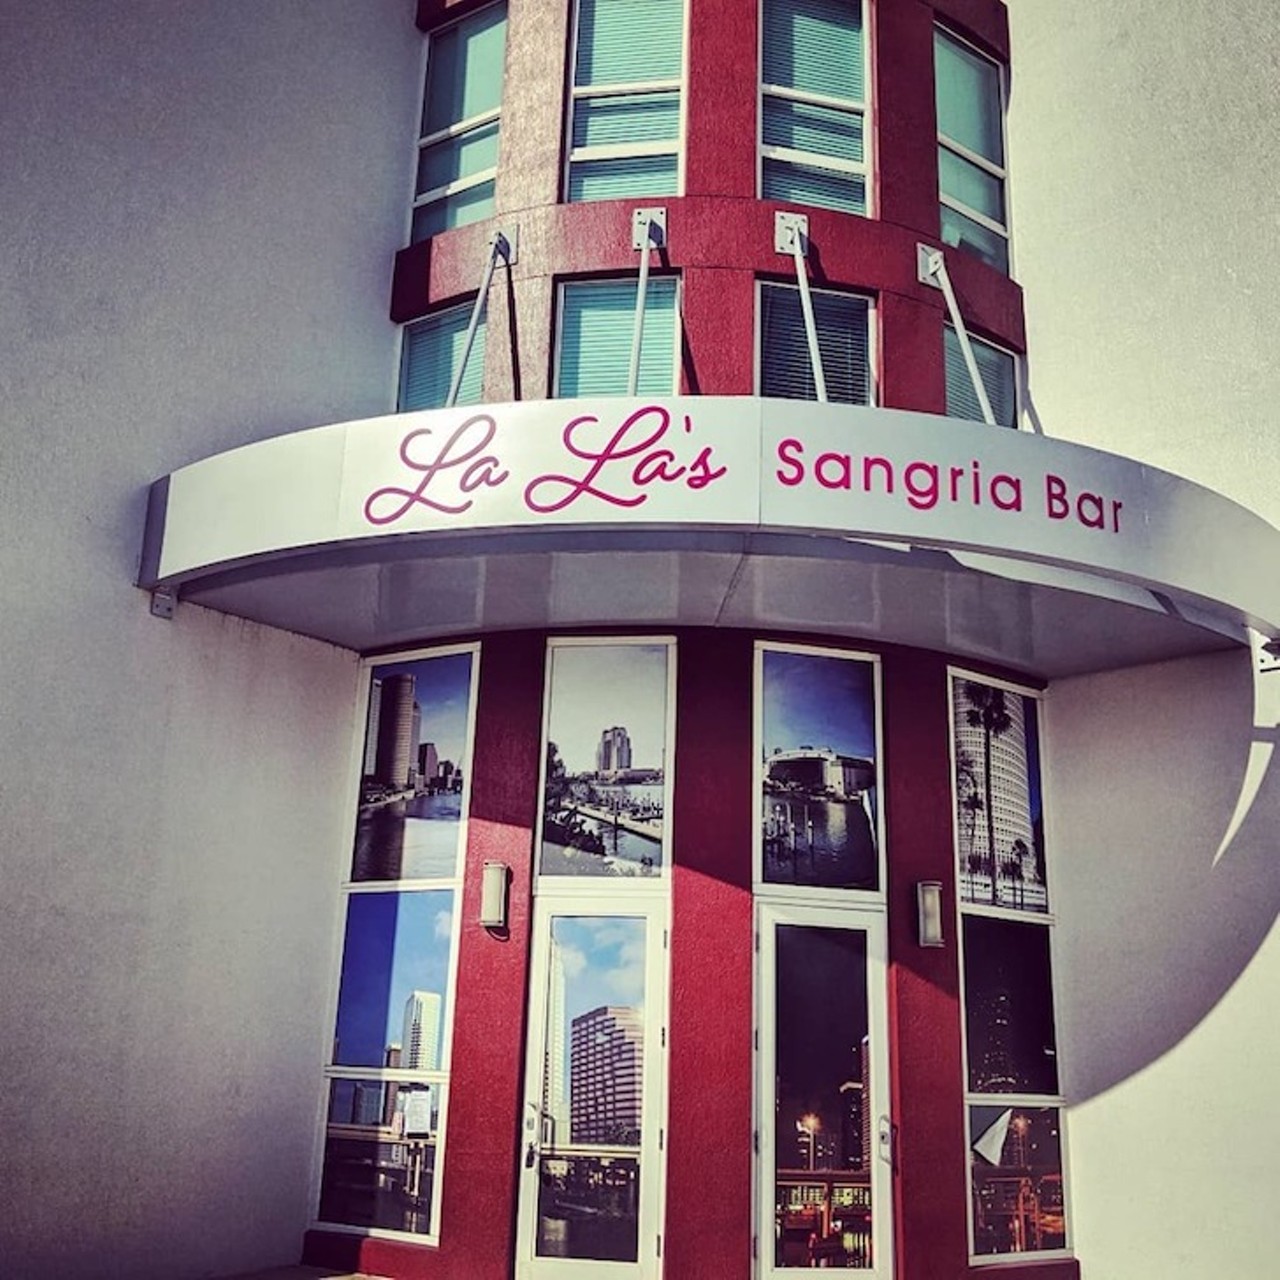 La La&#146;s Sangria Bar  
203 N. Meridian Ave., Tampa.
This fall, Channelside will welcome a sangria bar with some serious patio seating. Short scooter ride away from Sparkman Wharf.
Photo via La La&#146;s Sangria Bar/Facebook